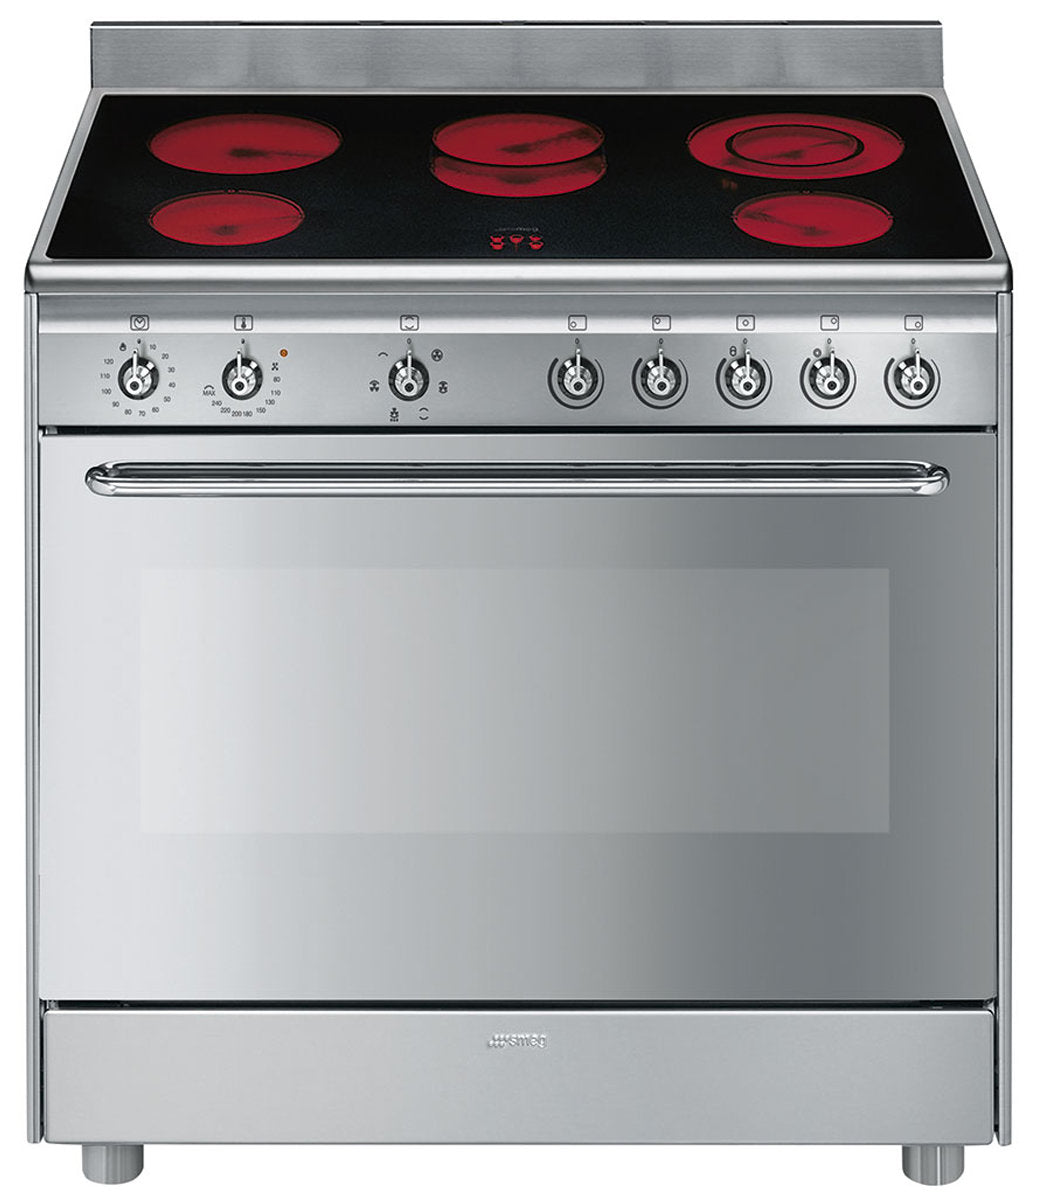 Smeg 90cm Stainless Steel Freestanding Electric Cooker FS9010CER - Ex Demo Discount